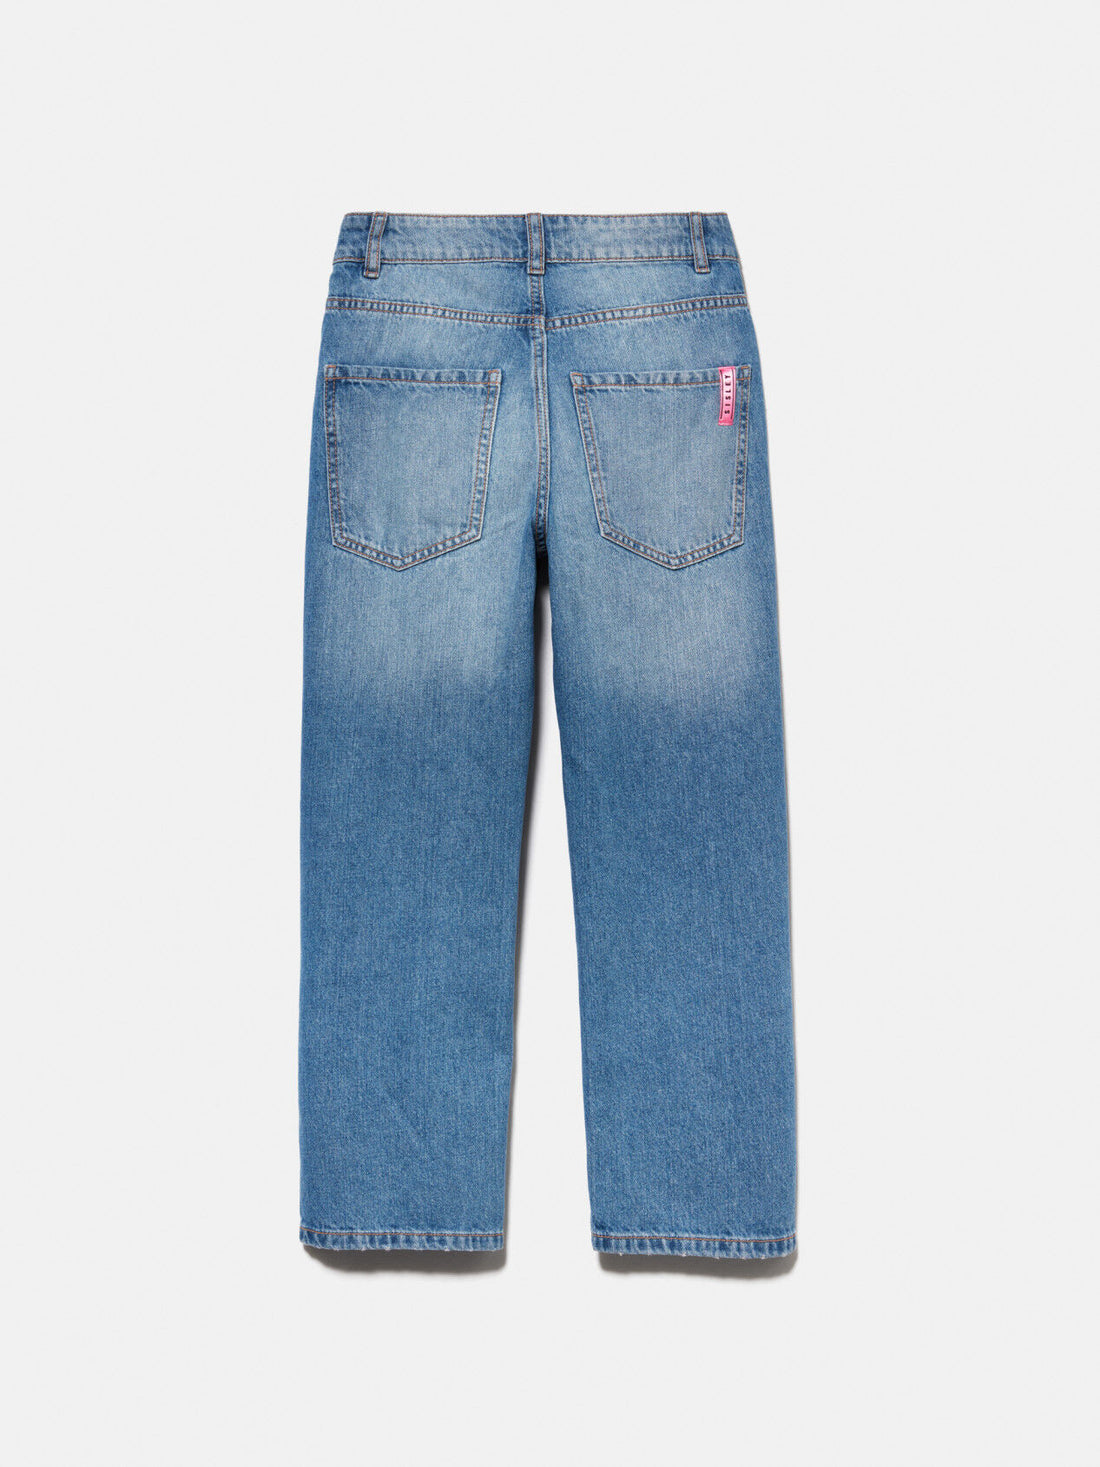 Regular Fit Jeans With Rips - 02